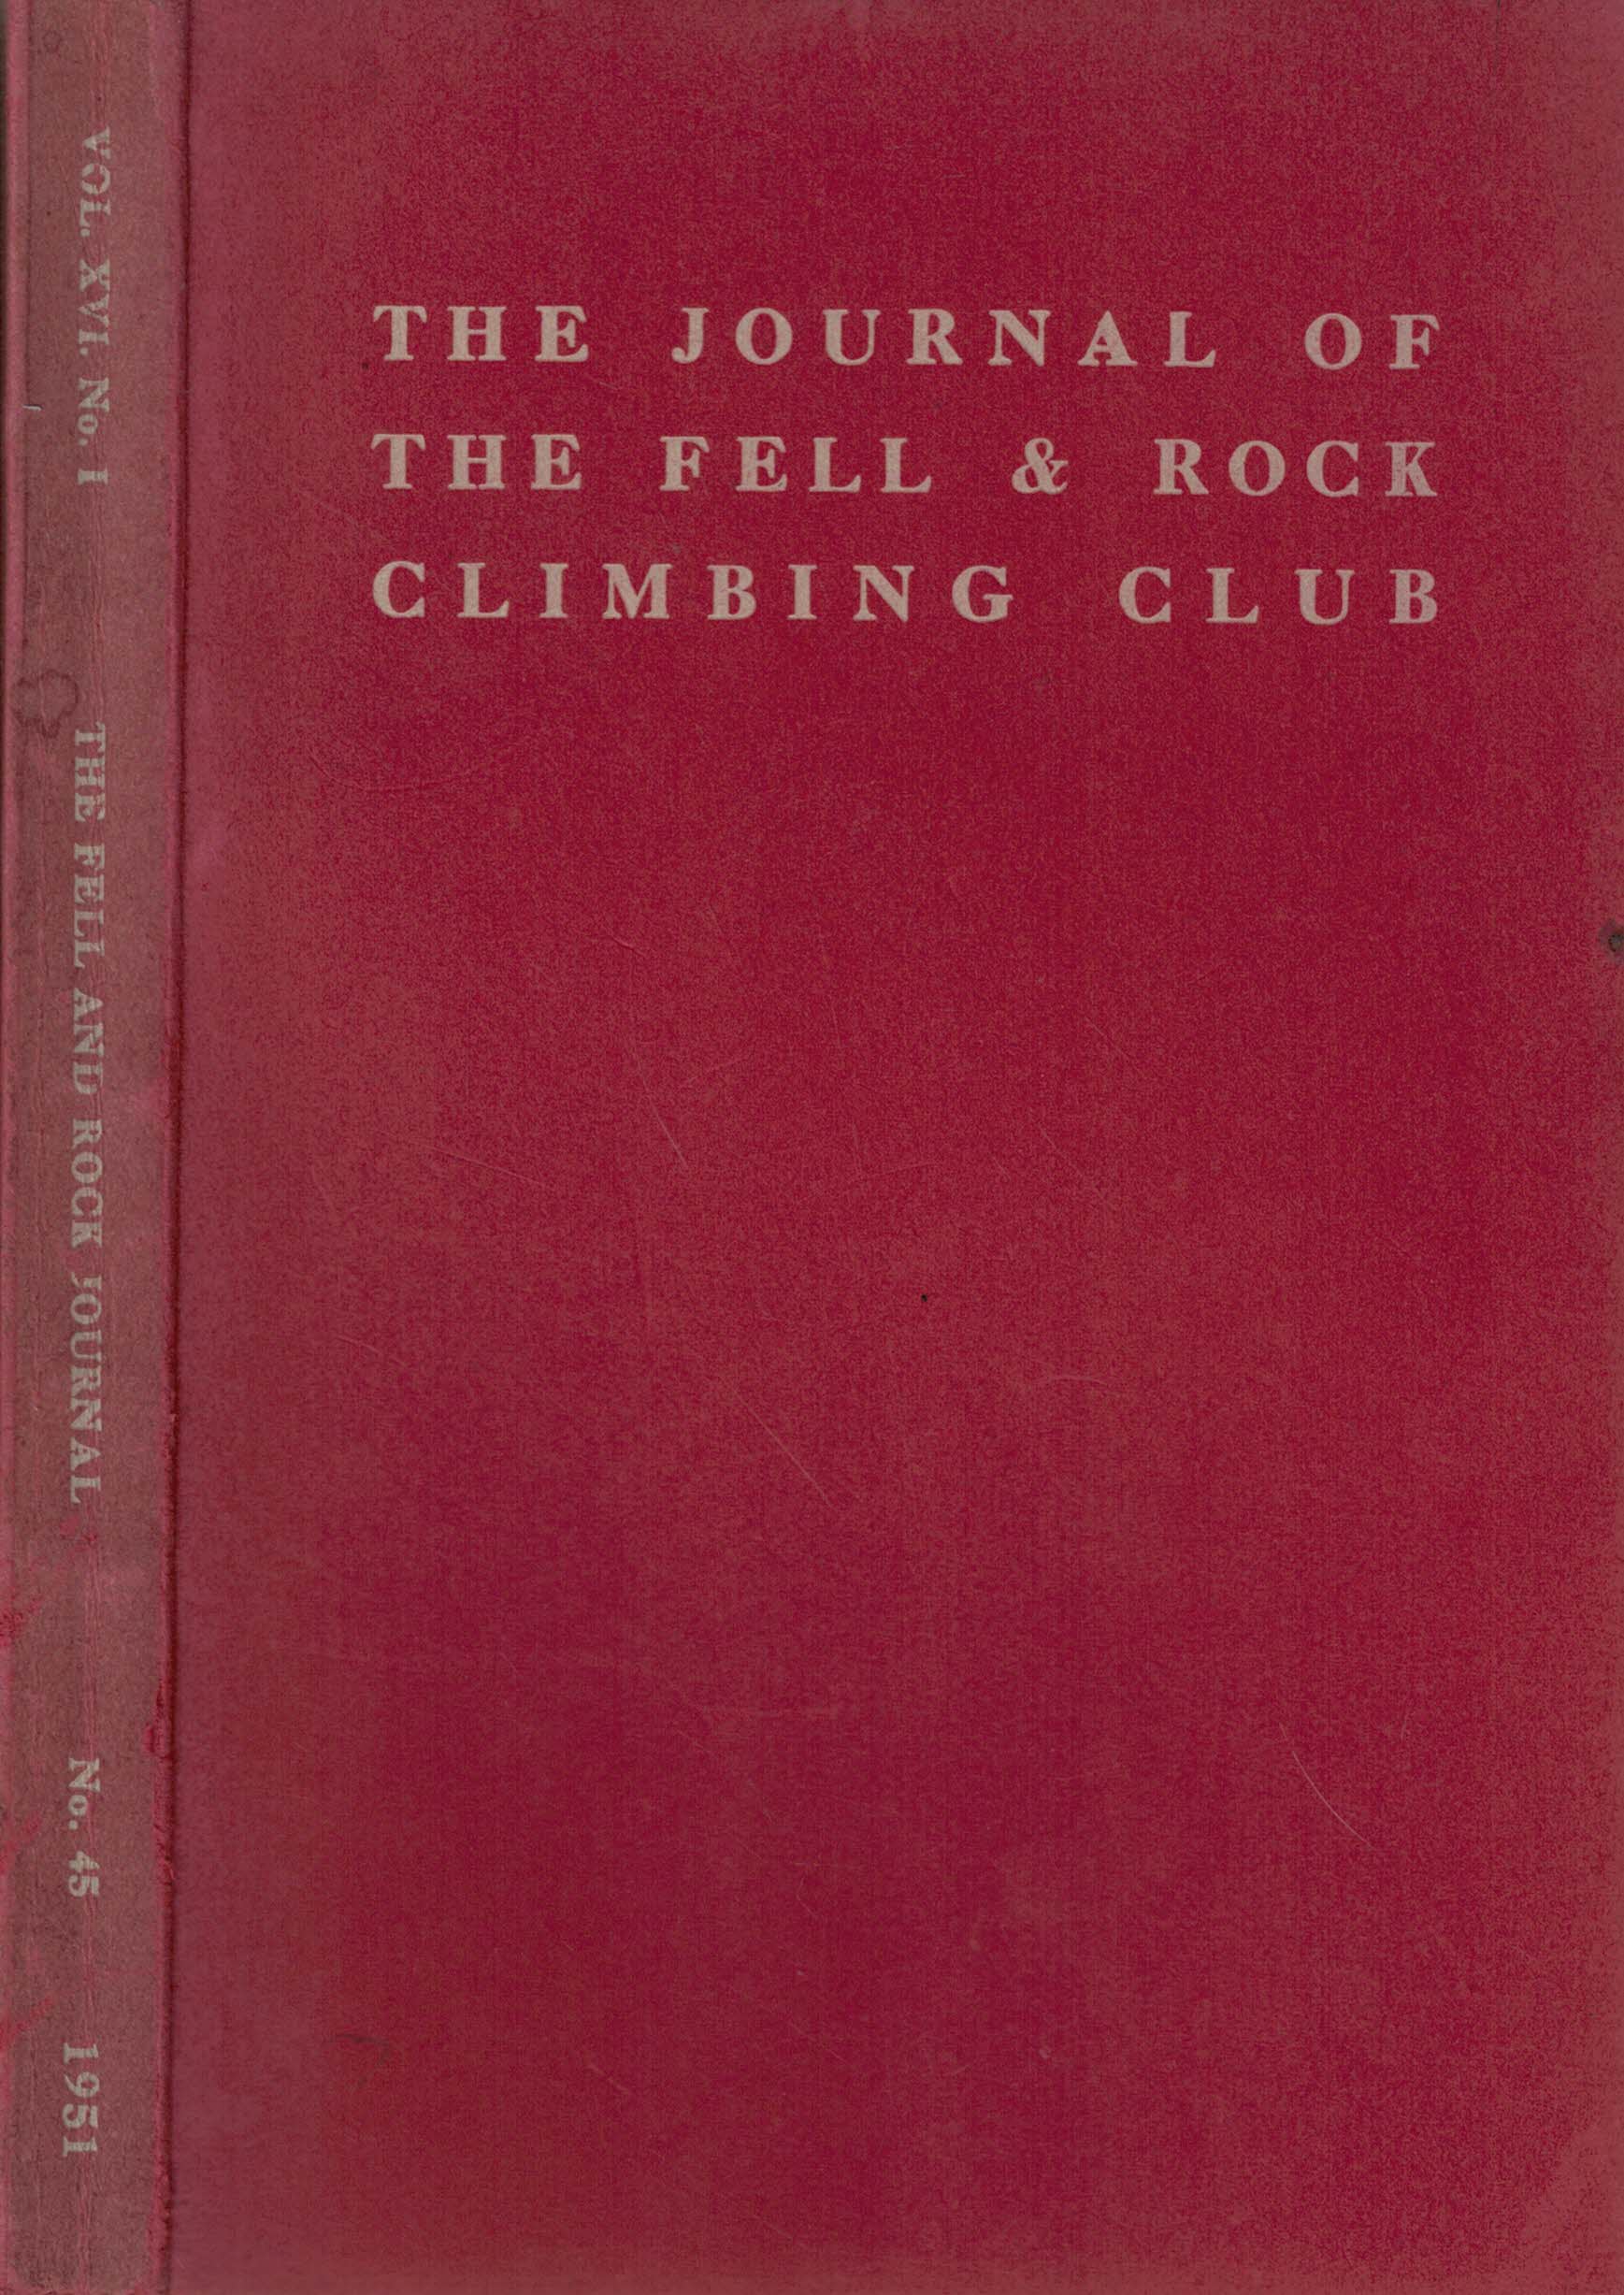 The Journal of the Fell & Rock Climbing Club of the English Lake District. No 45. (Volume 15 No 1) 1951.